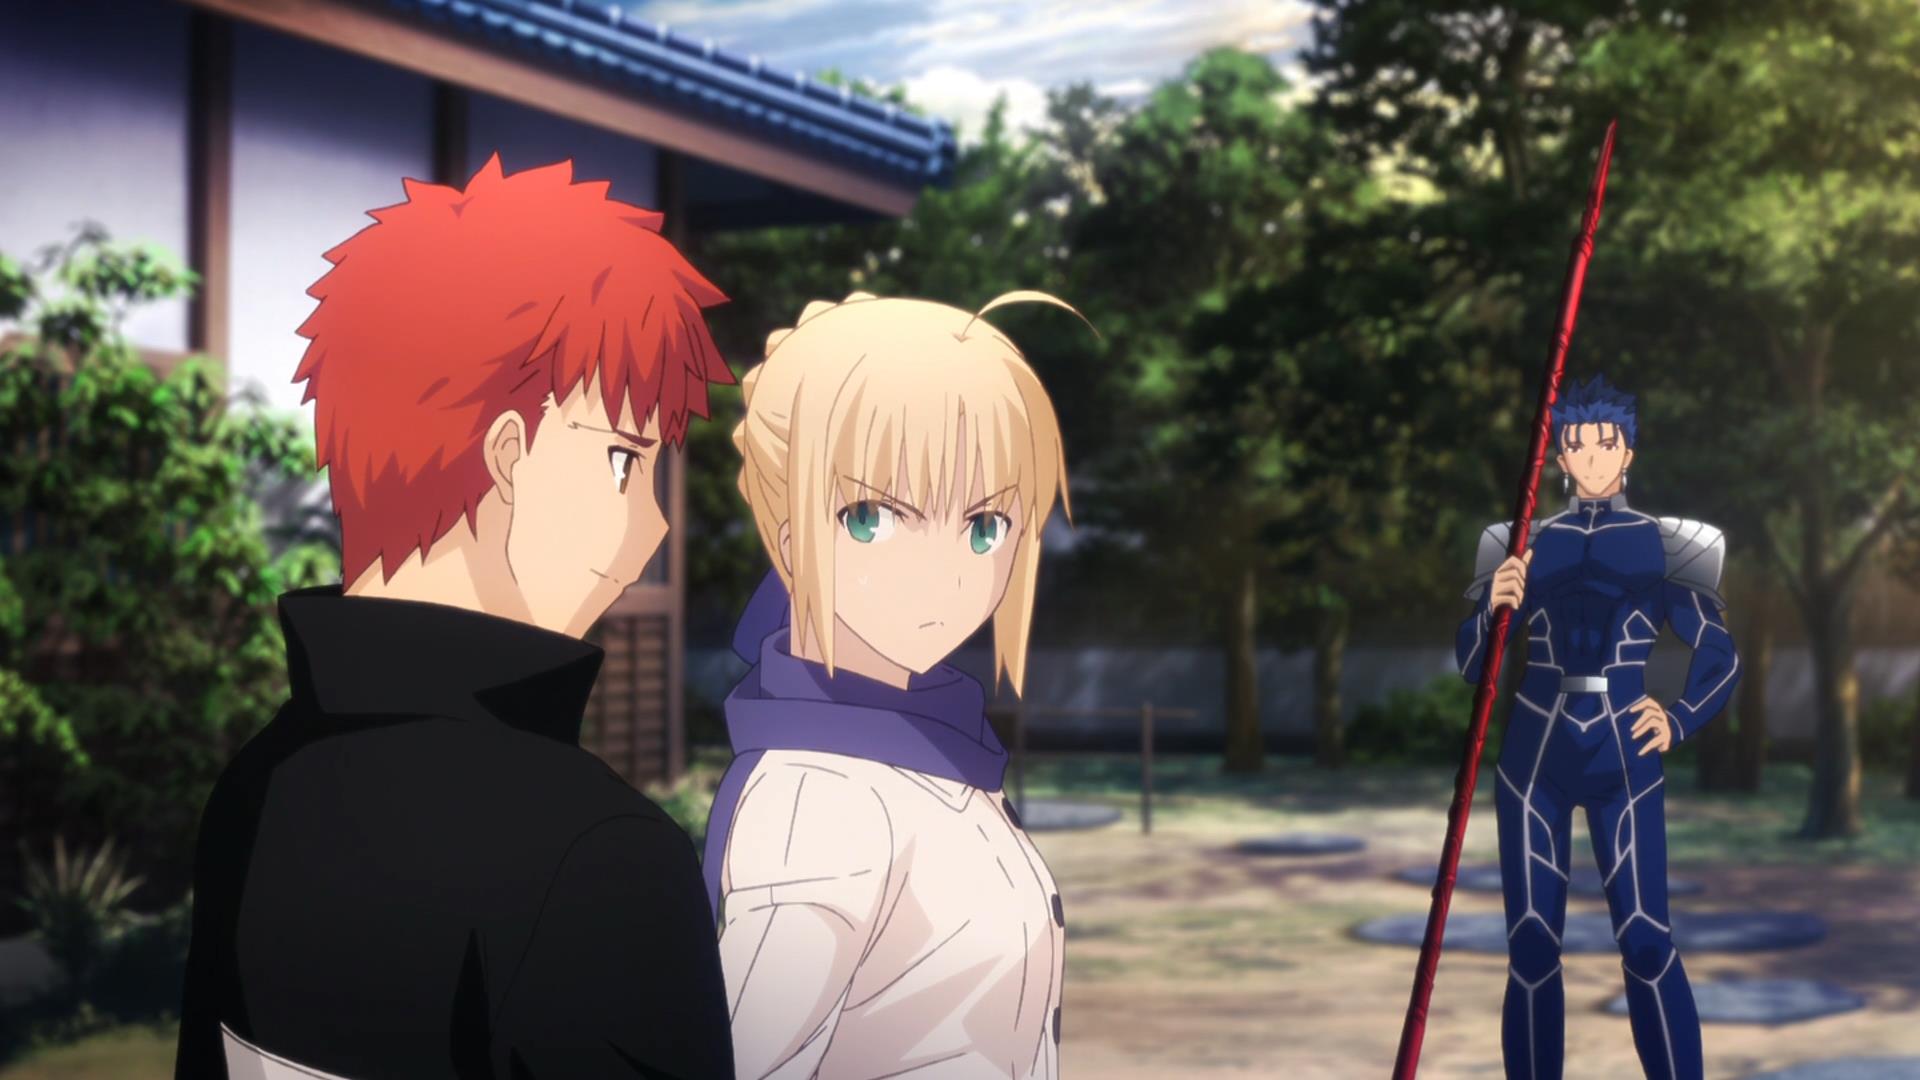 To save Shirou & Saber, Rin contracts with Saber. 